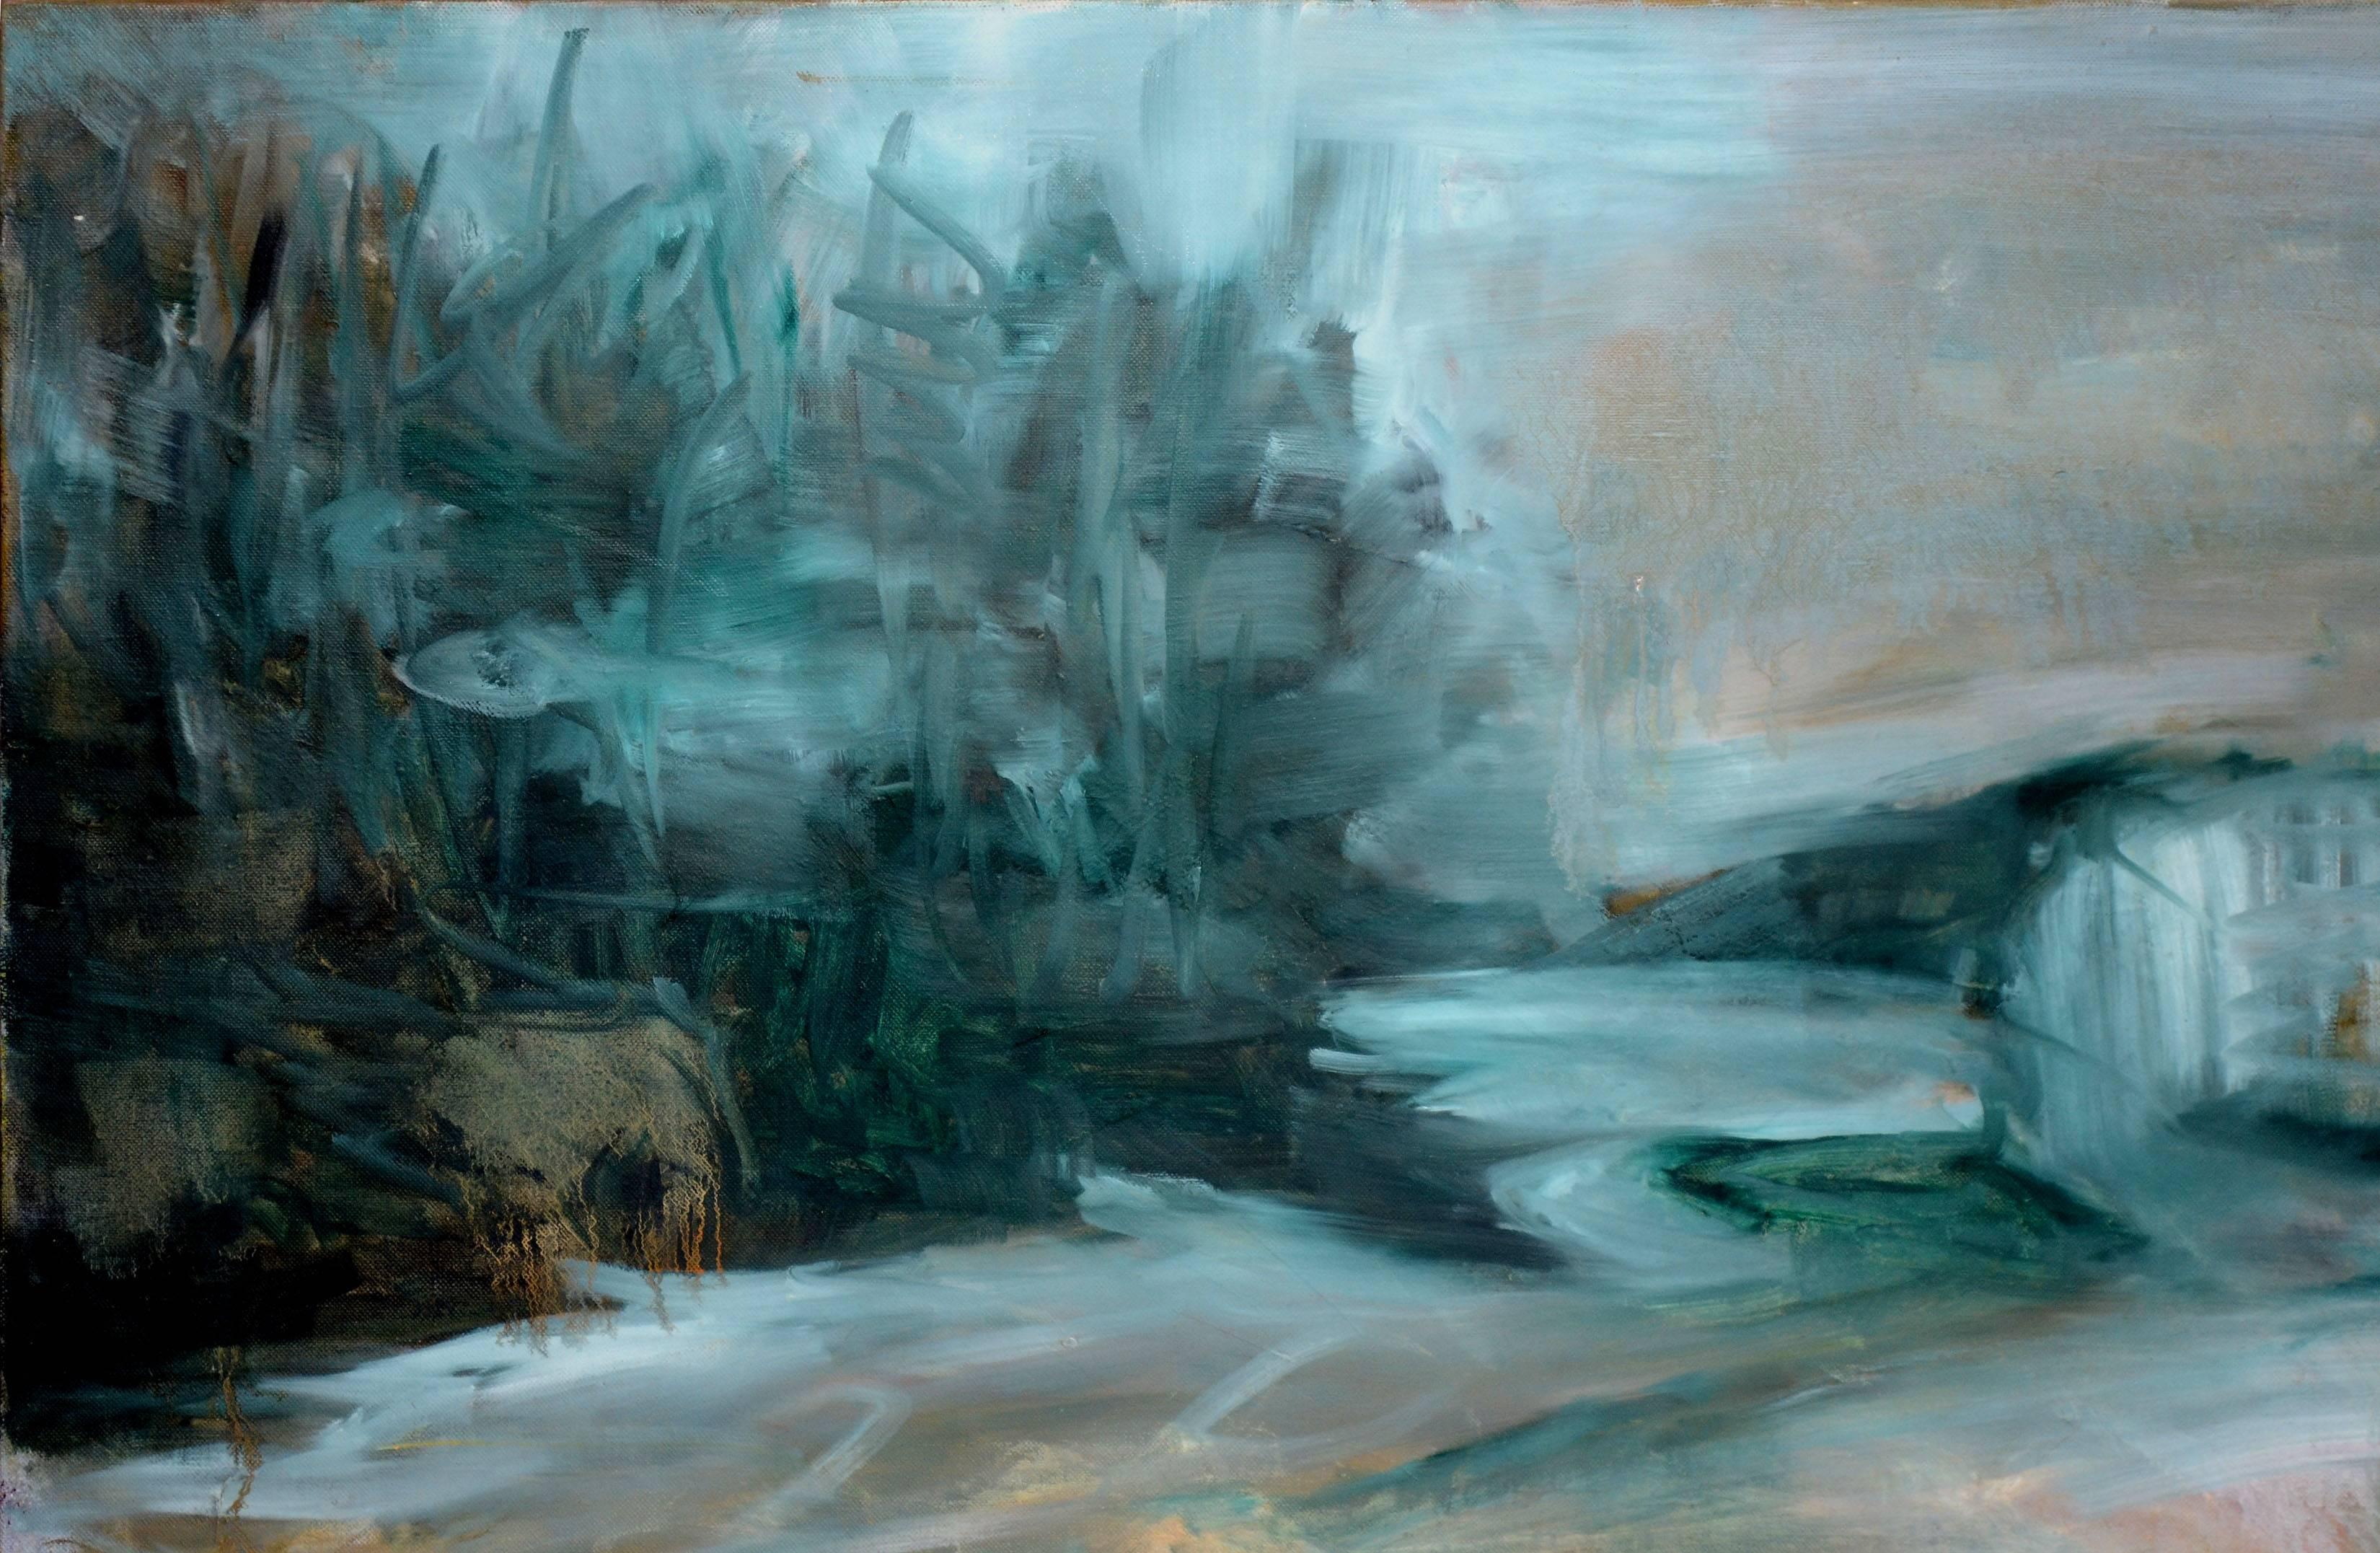 Large-Scale Modern Abstracted Teal Landscape - Painting by Daniel David Fuentes